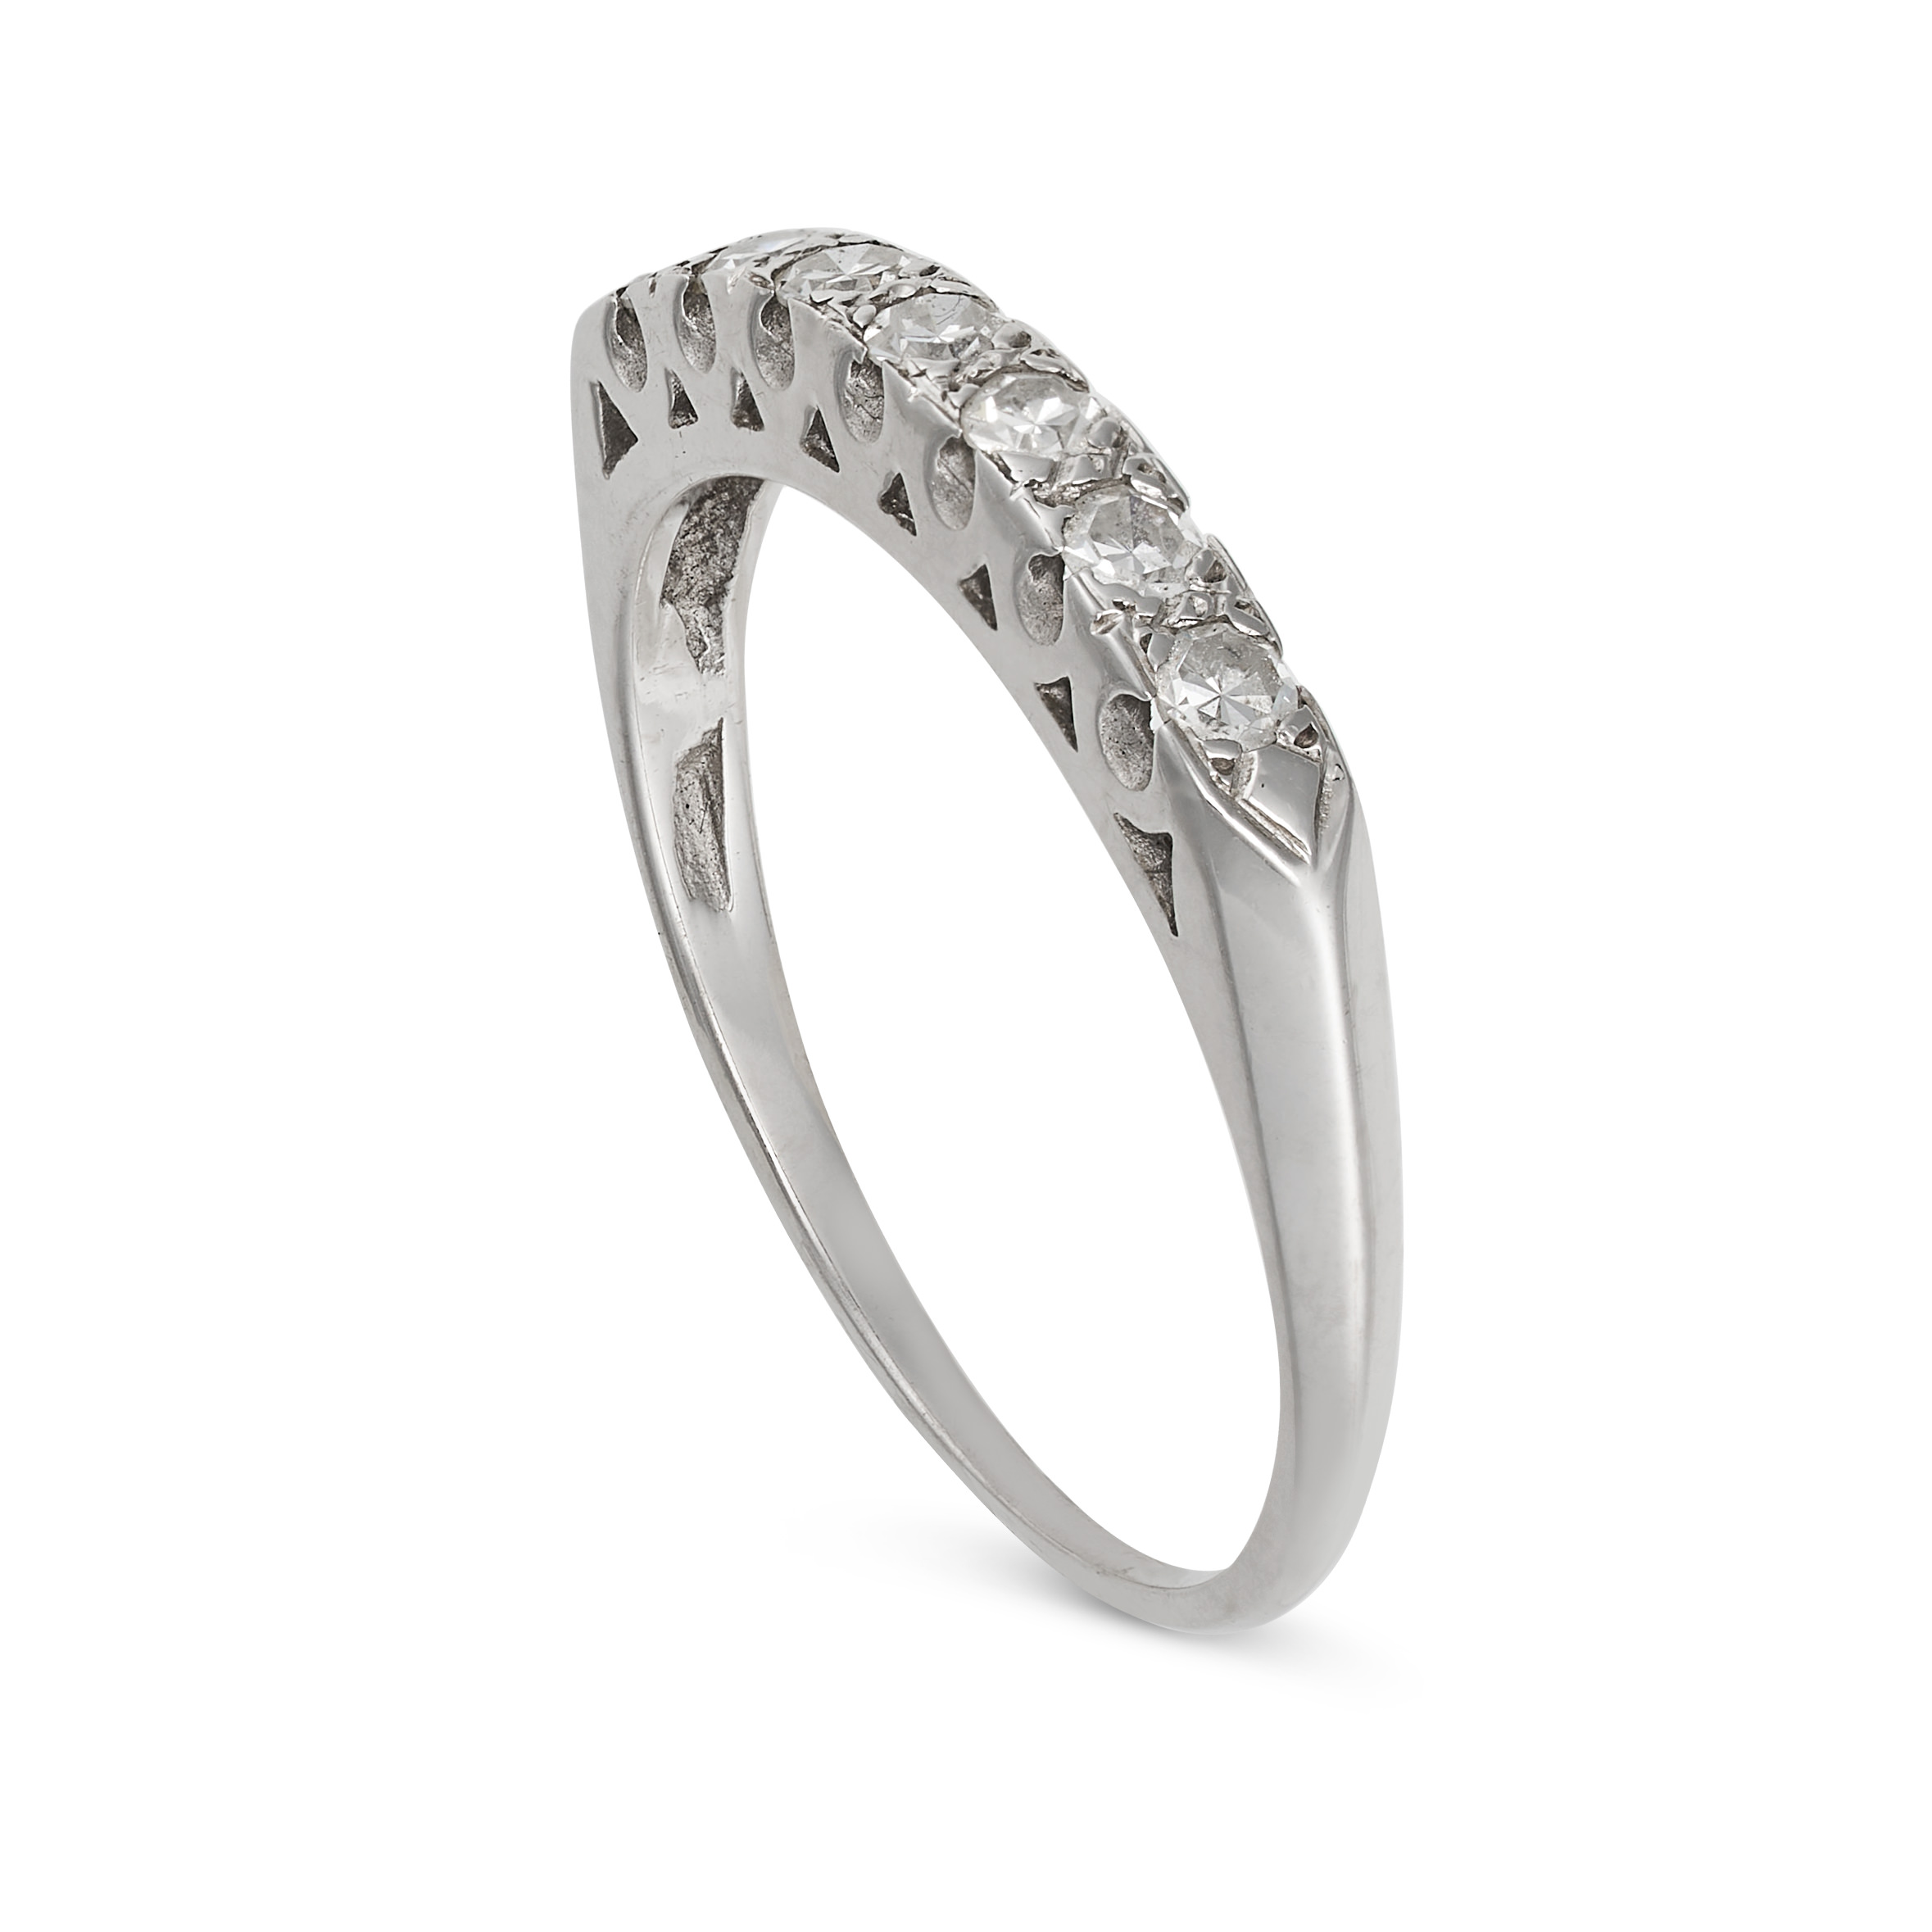 A DIAMOND RING set with a row of seven single cut diamonds, no assay marks, size N / 6.75, 1.8g. - Image 2 of 2